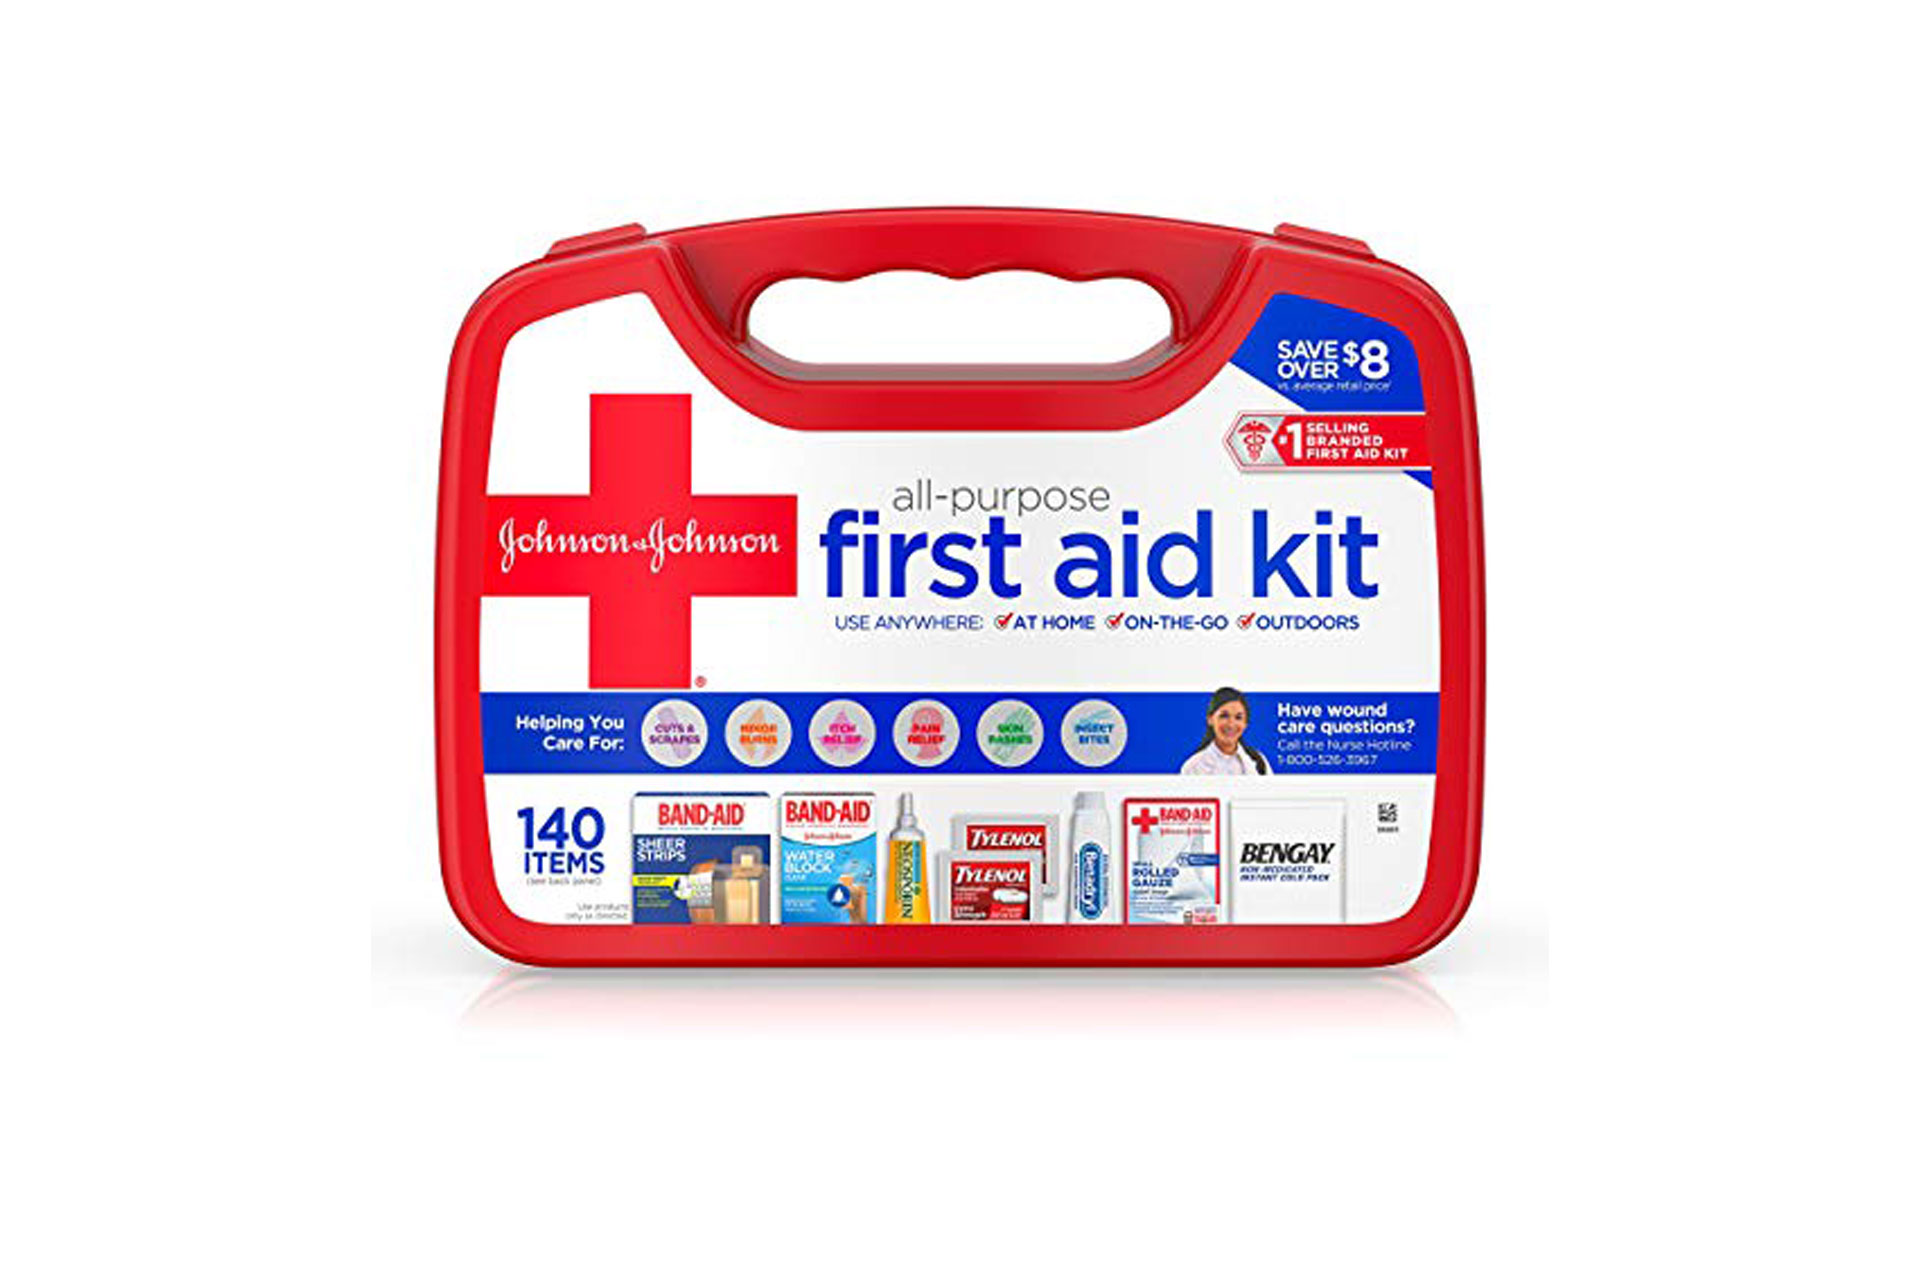 on the go first aid kit